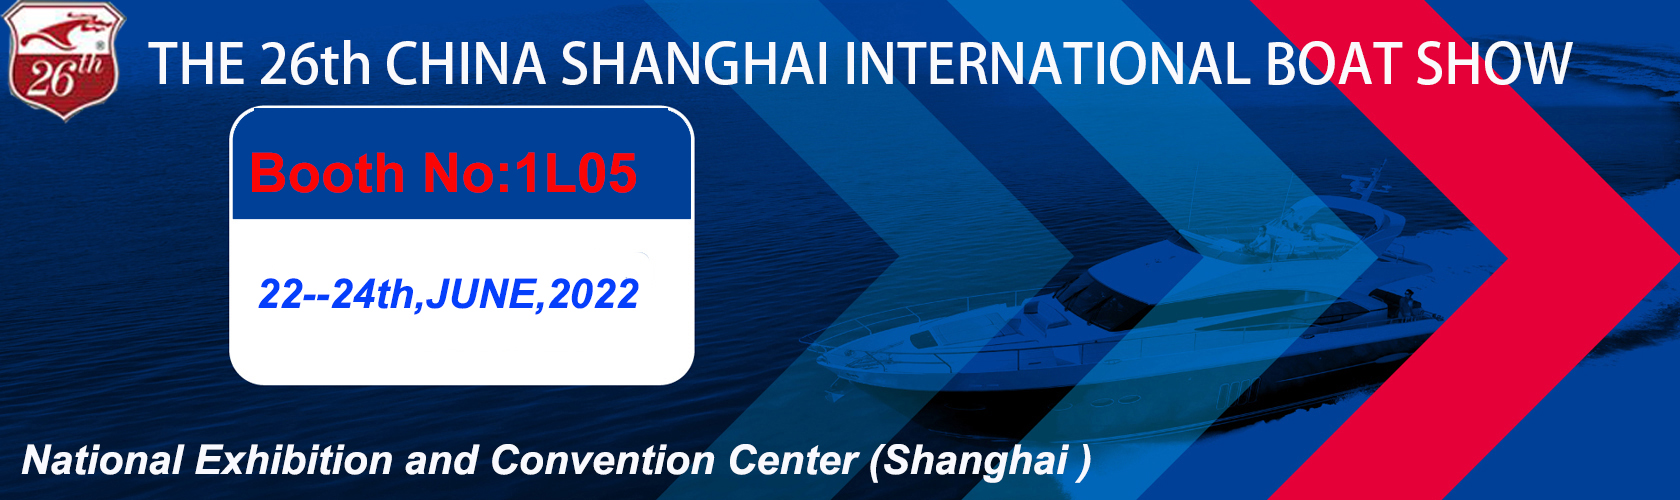 Attend boat show